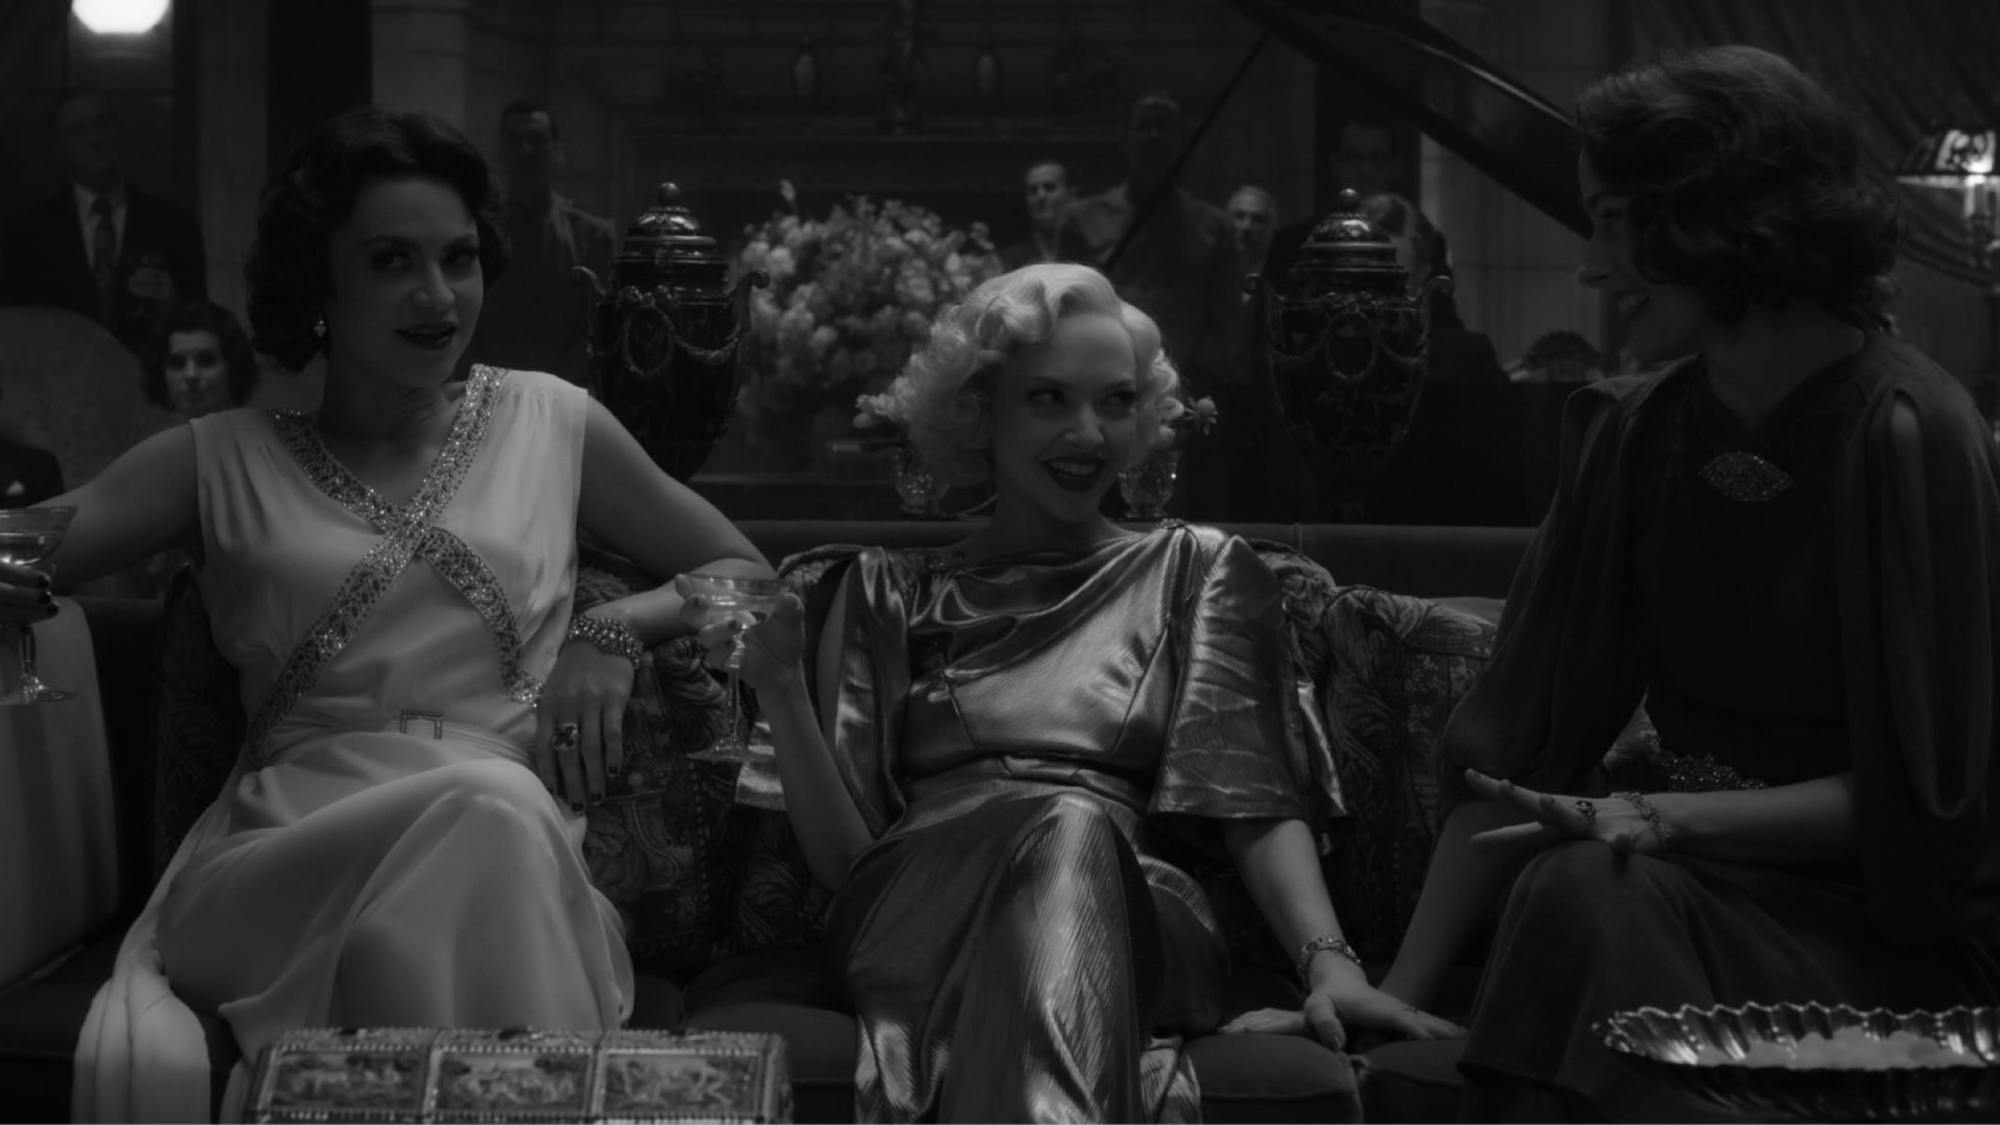 Davies is seated on a couch, talking to two women in this shot from the film. She wears a stunning gold lamé dress that falls like liquid and catches the light. She holds a cocktail. Other party guests are visible in the background, between ornate urns and flower arrangements.